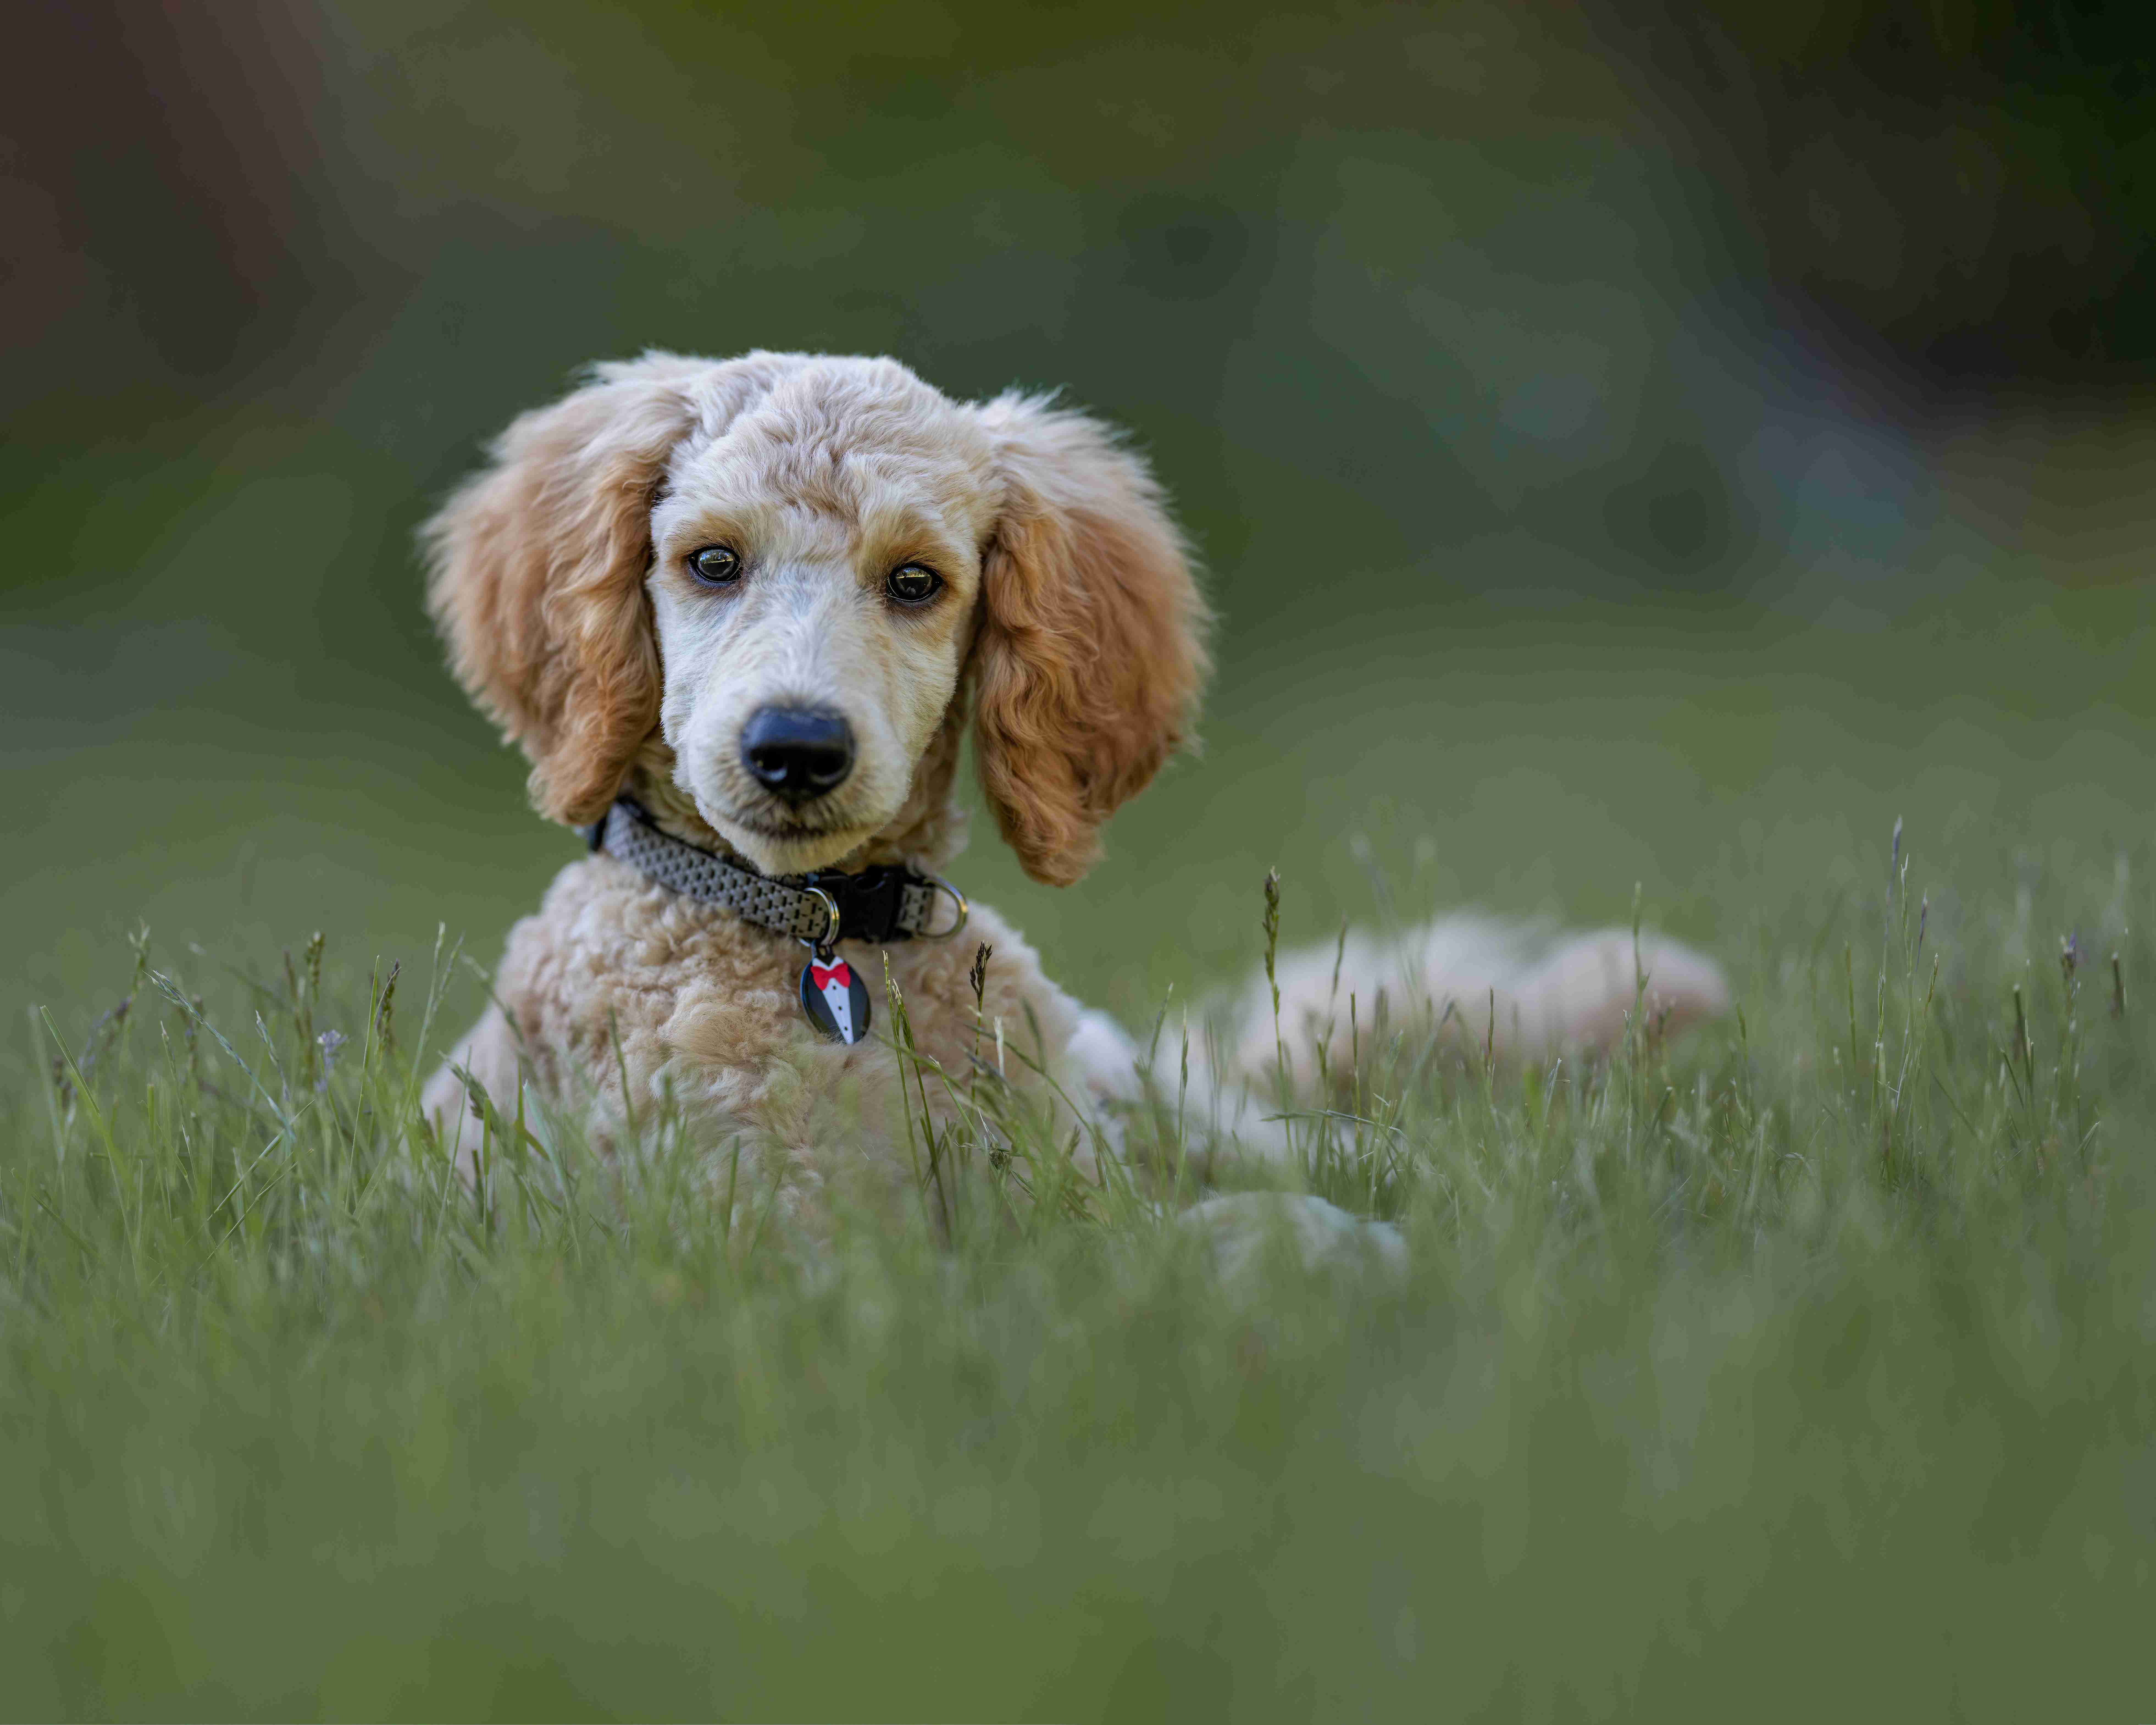 How did you handle any instances of nipping or biting from your Poodle puppy?